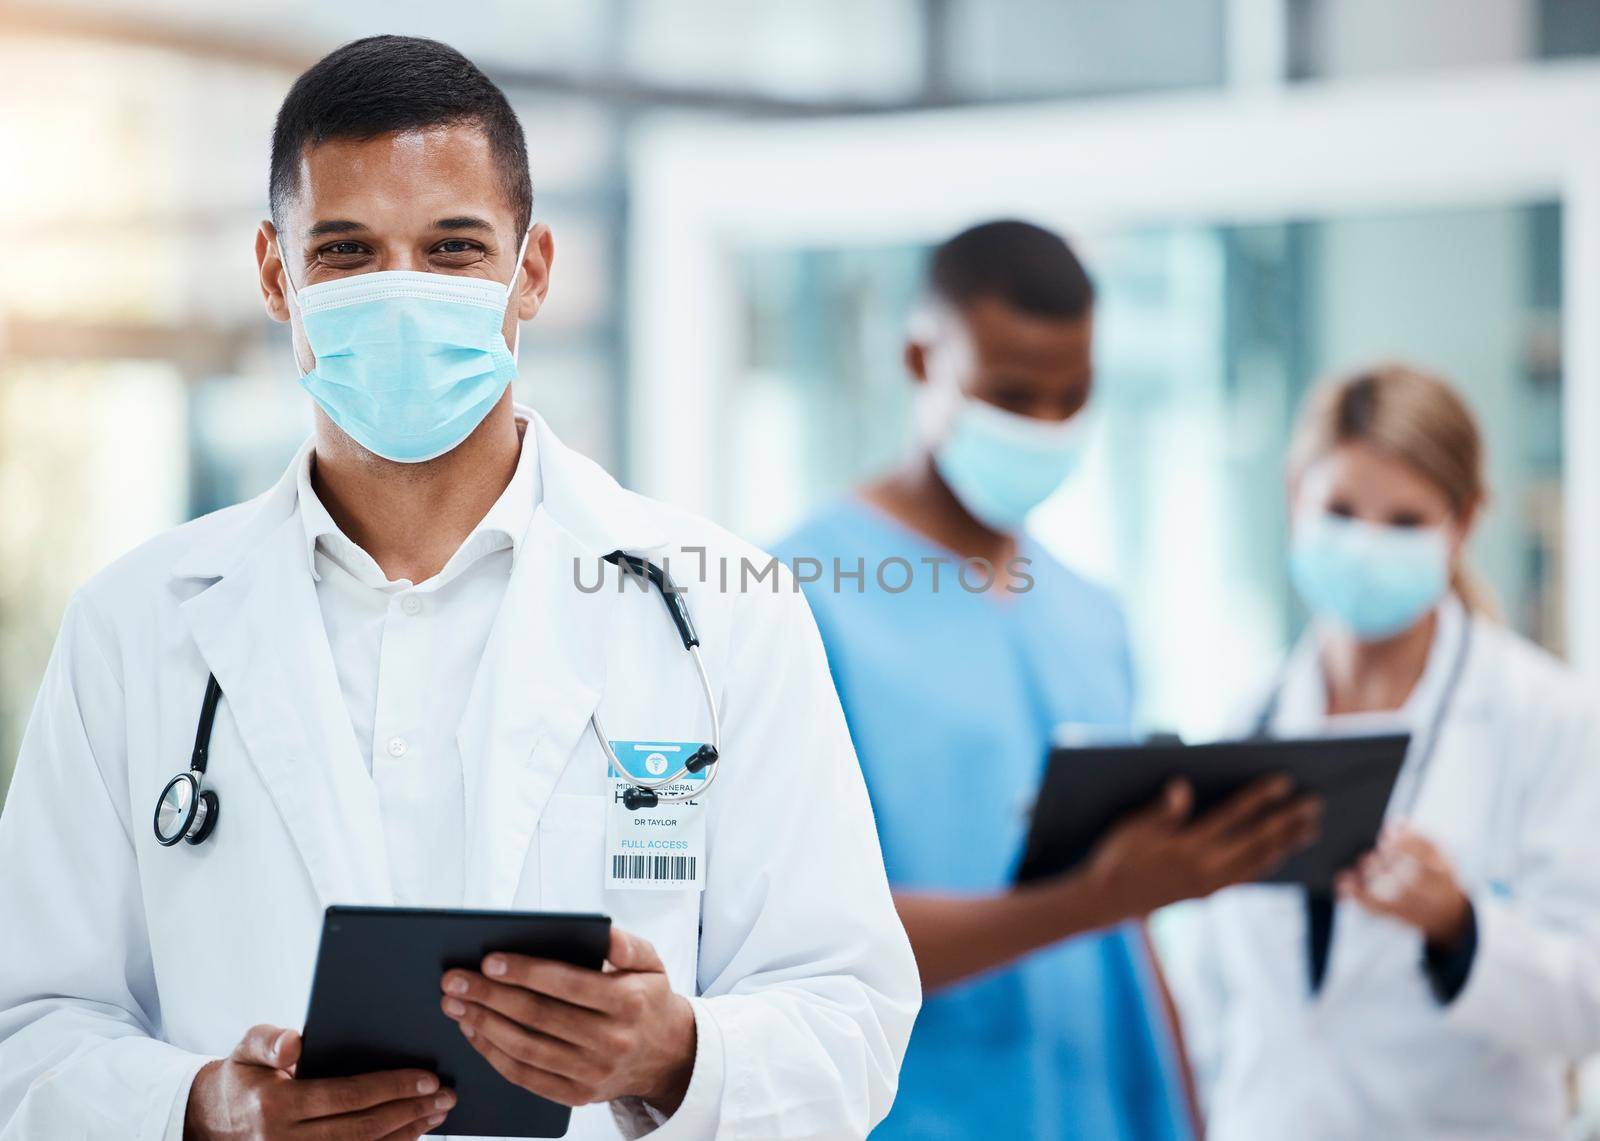 A successful male doctor browsing the internet, using a tablet and wearing a mask inside a hospital. Portrait of a healthcare professional searching covid, flu or disease on a digital device.